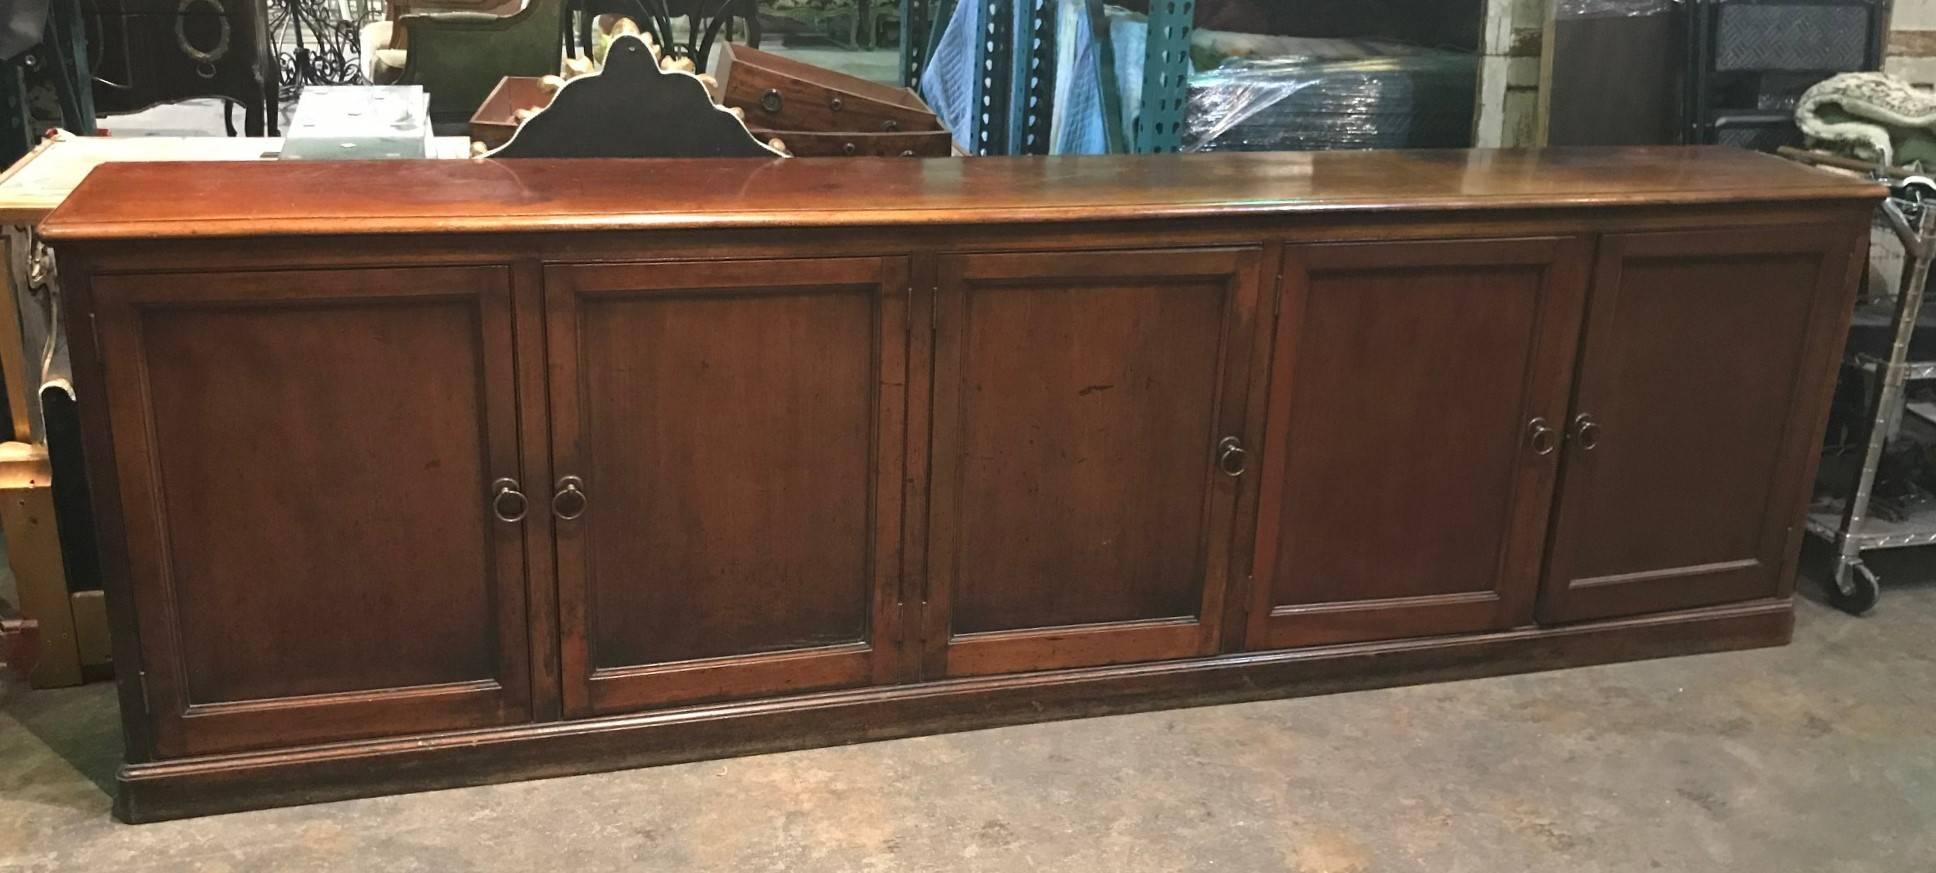 Fabulous 19th century English red mahogany five door credenza with brass ring pulls and wonderfully aged mellow patina,

circa 1890.

Nice long size with narrow depth.